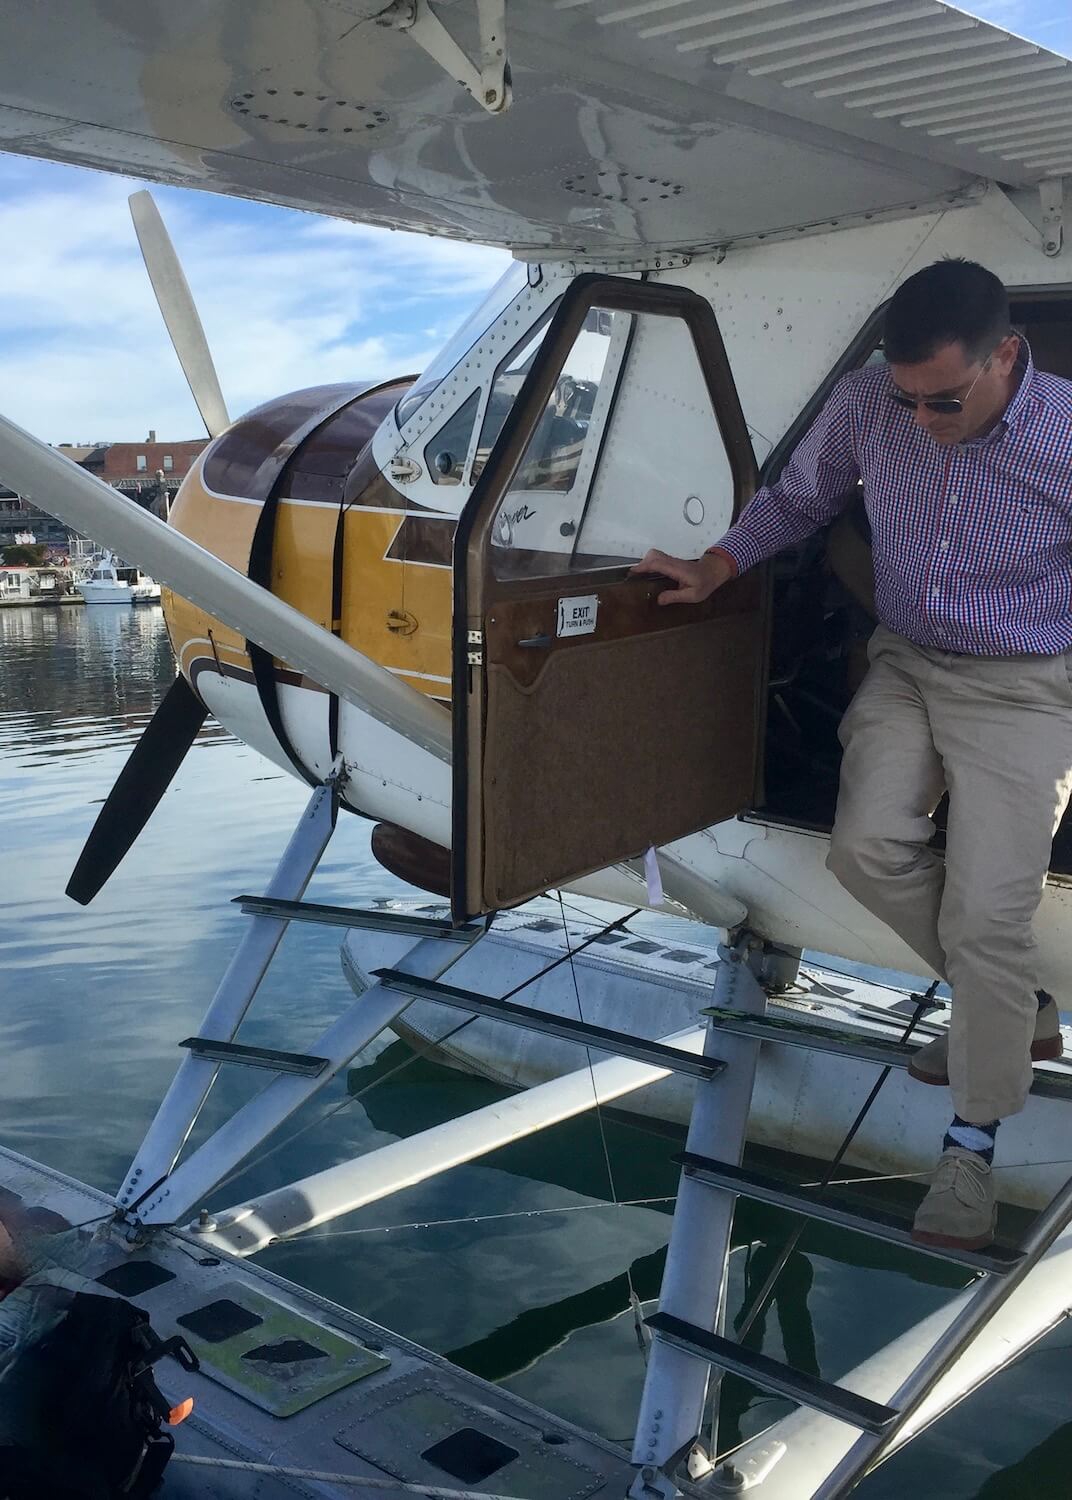 For those moving to Seattle a plane trip on Kenmore Air can be an exciting way to connect with nature.  Here a man with a purple checkered shirt steps out of a float plane with propellers in the front of the nose.